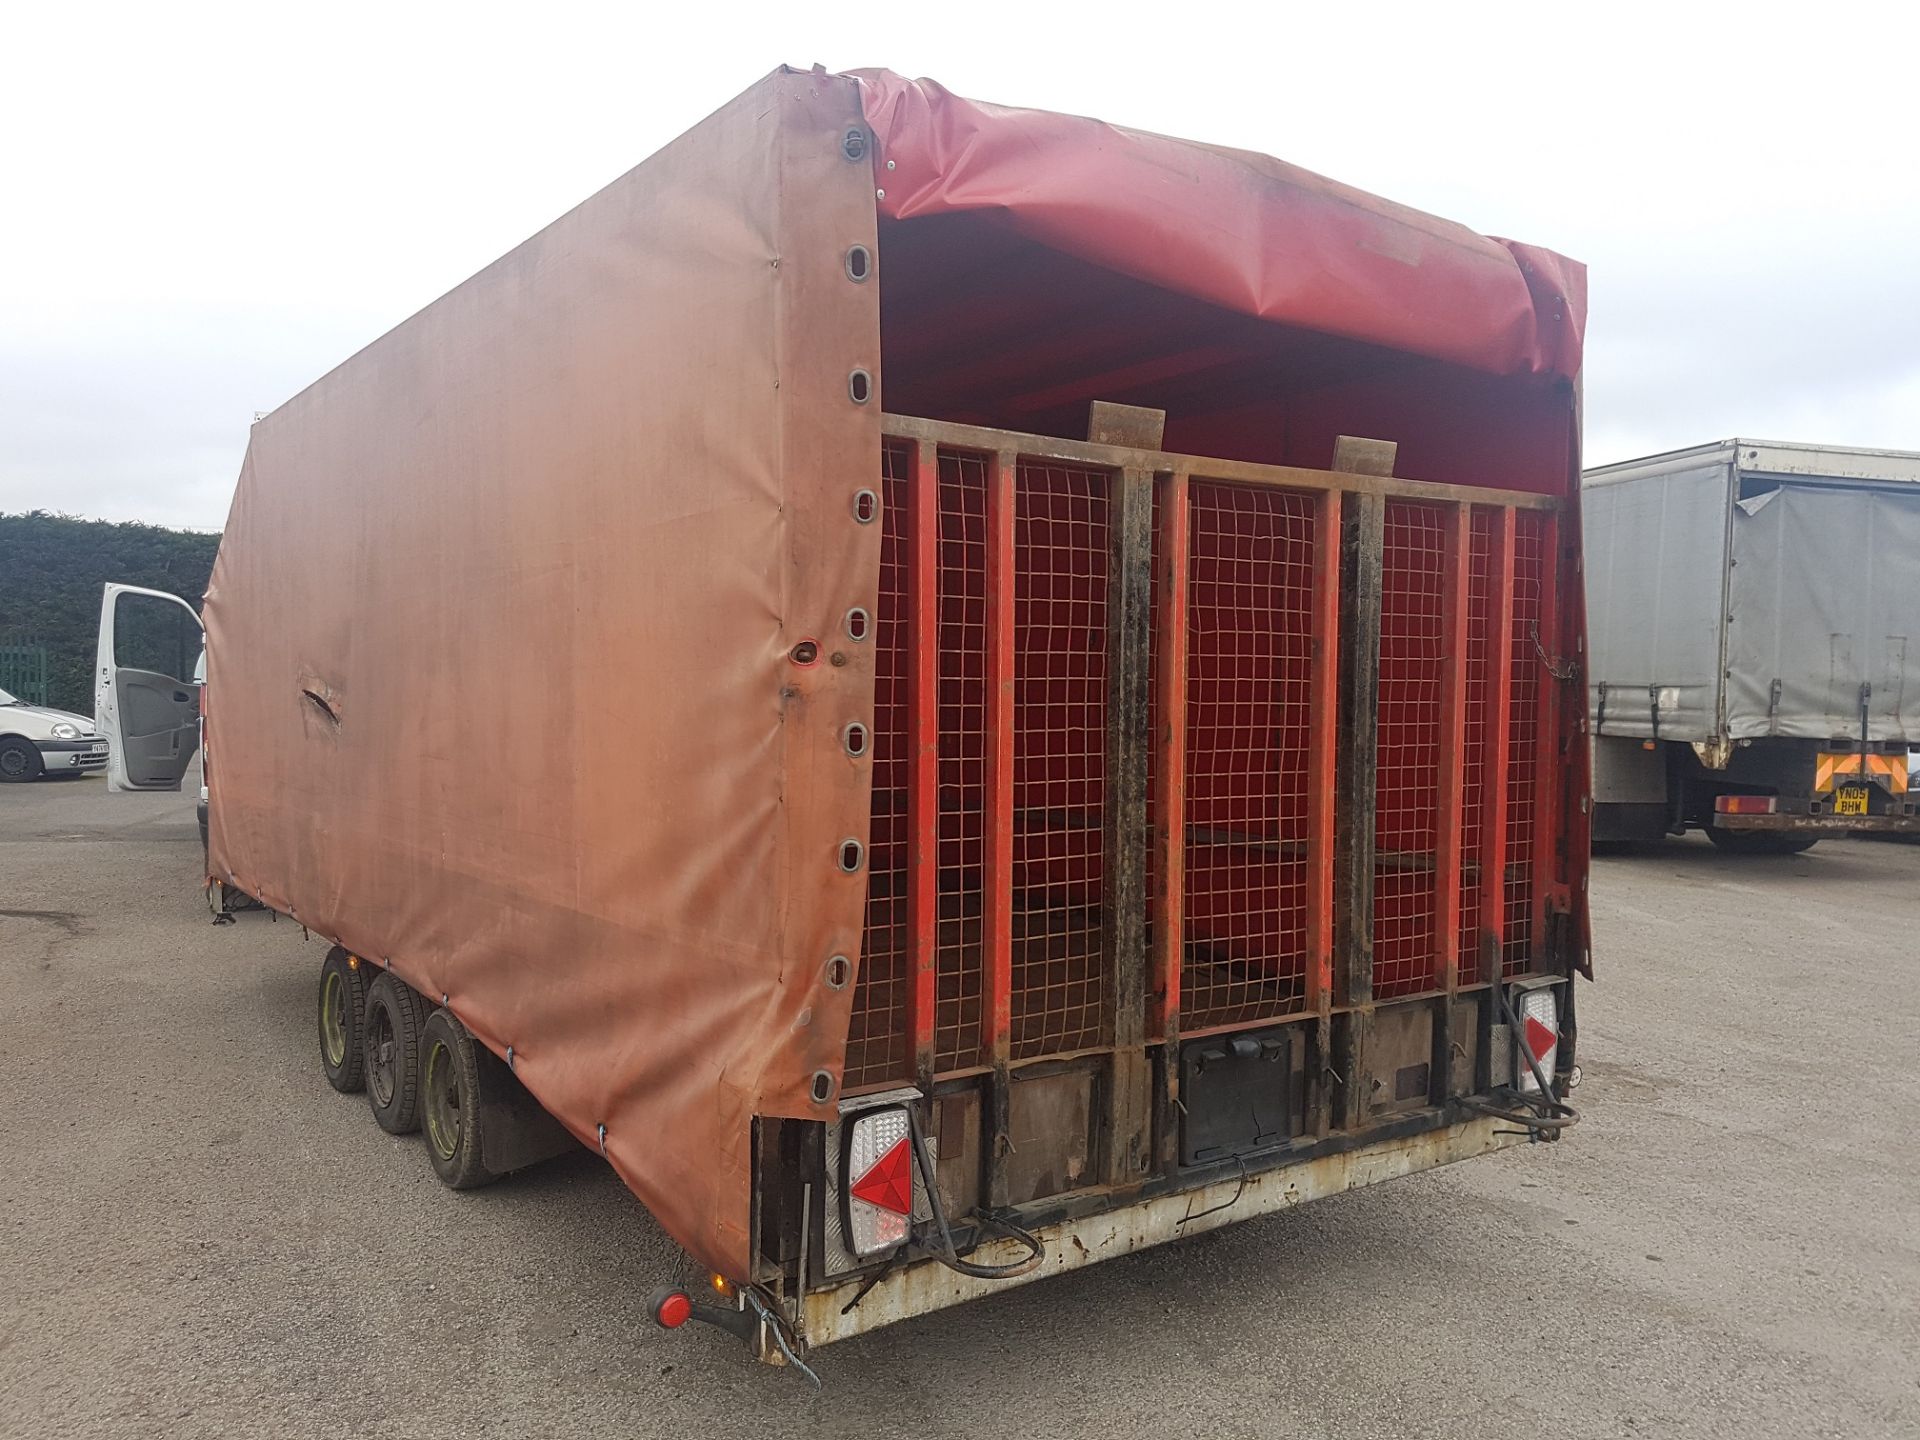 TRI-AXLE BEAVER-TAIL CAR TRANSPORTER COVERED TRAILER *PLUS VAT*   NEW AXLE SPRINGS, BRAKES AND LED - Image 5 of 13